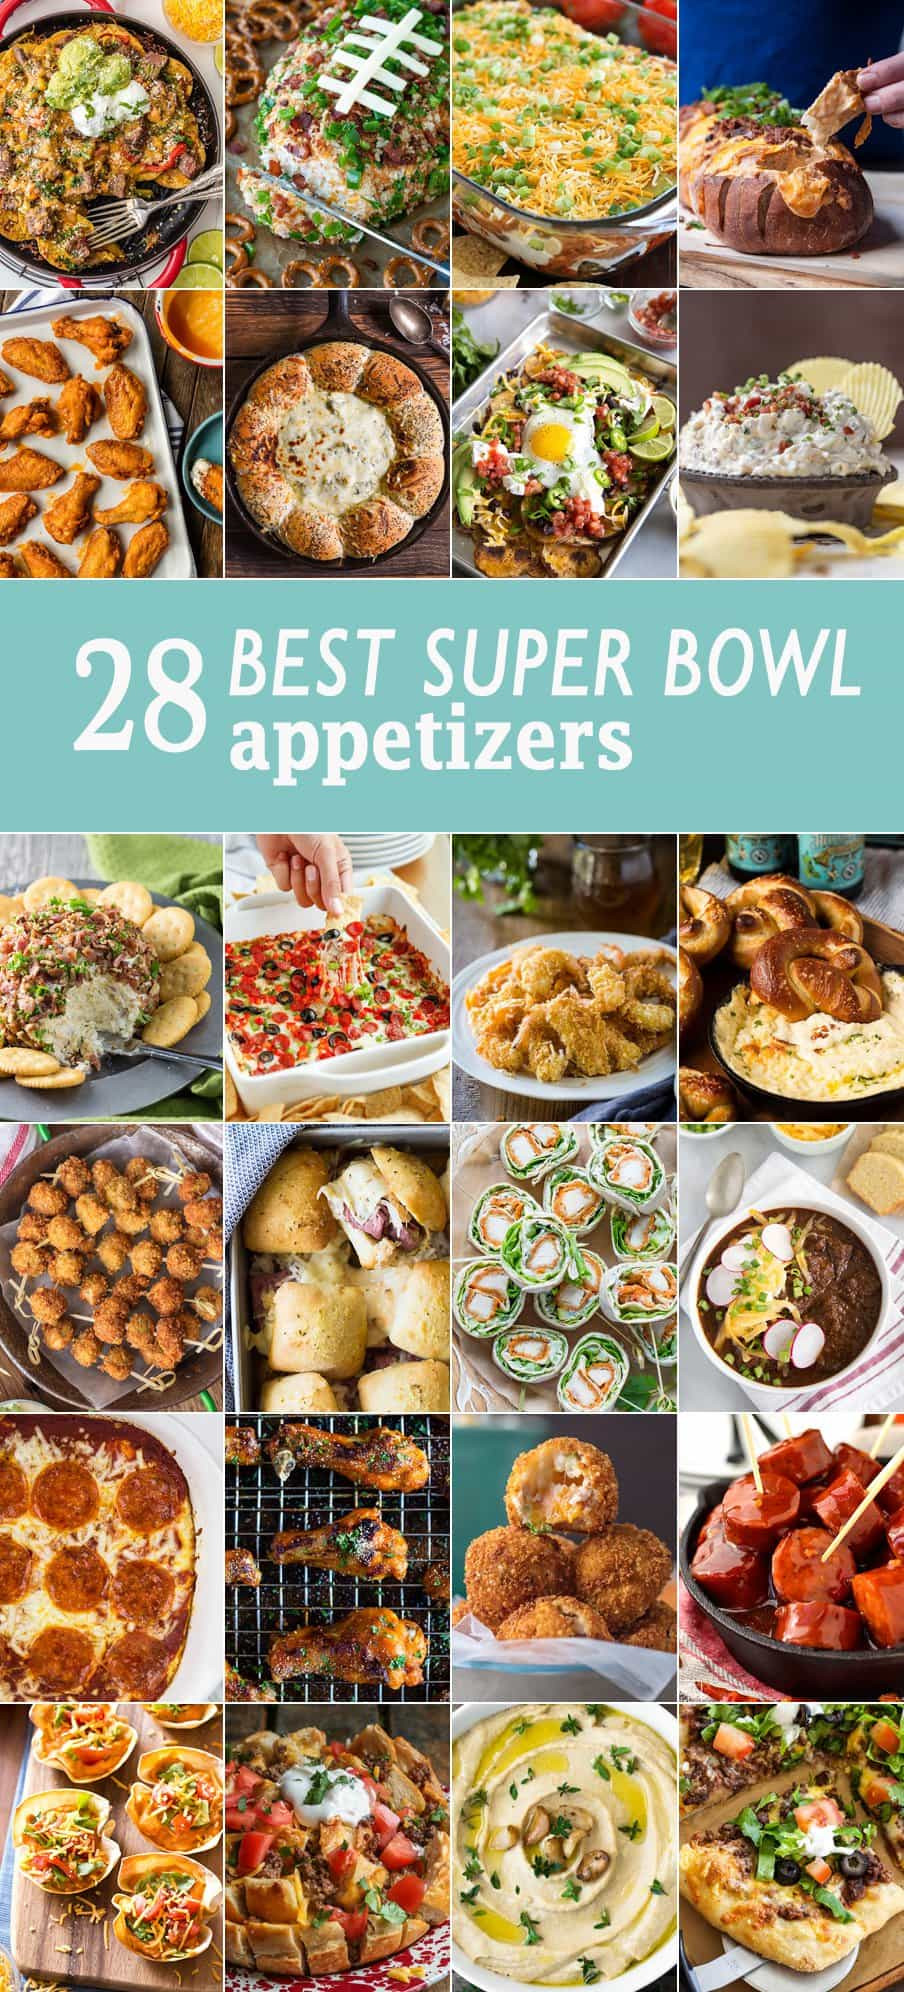 Super Bowl Party Dips Recipes
 10 Best Super Bowl Appetizers The Cookie Rookie